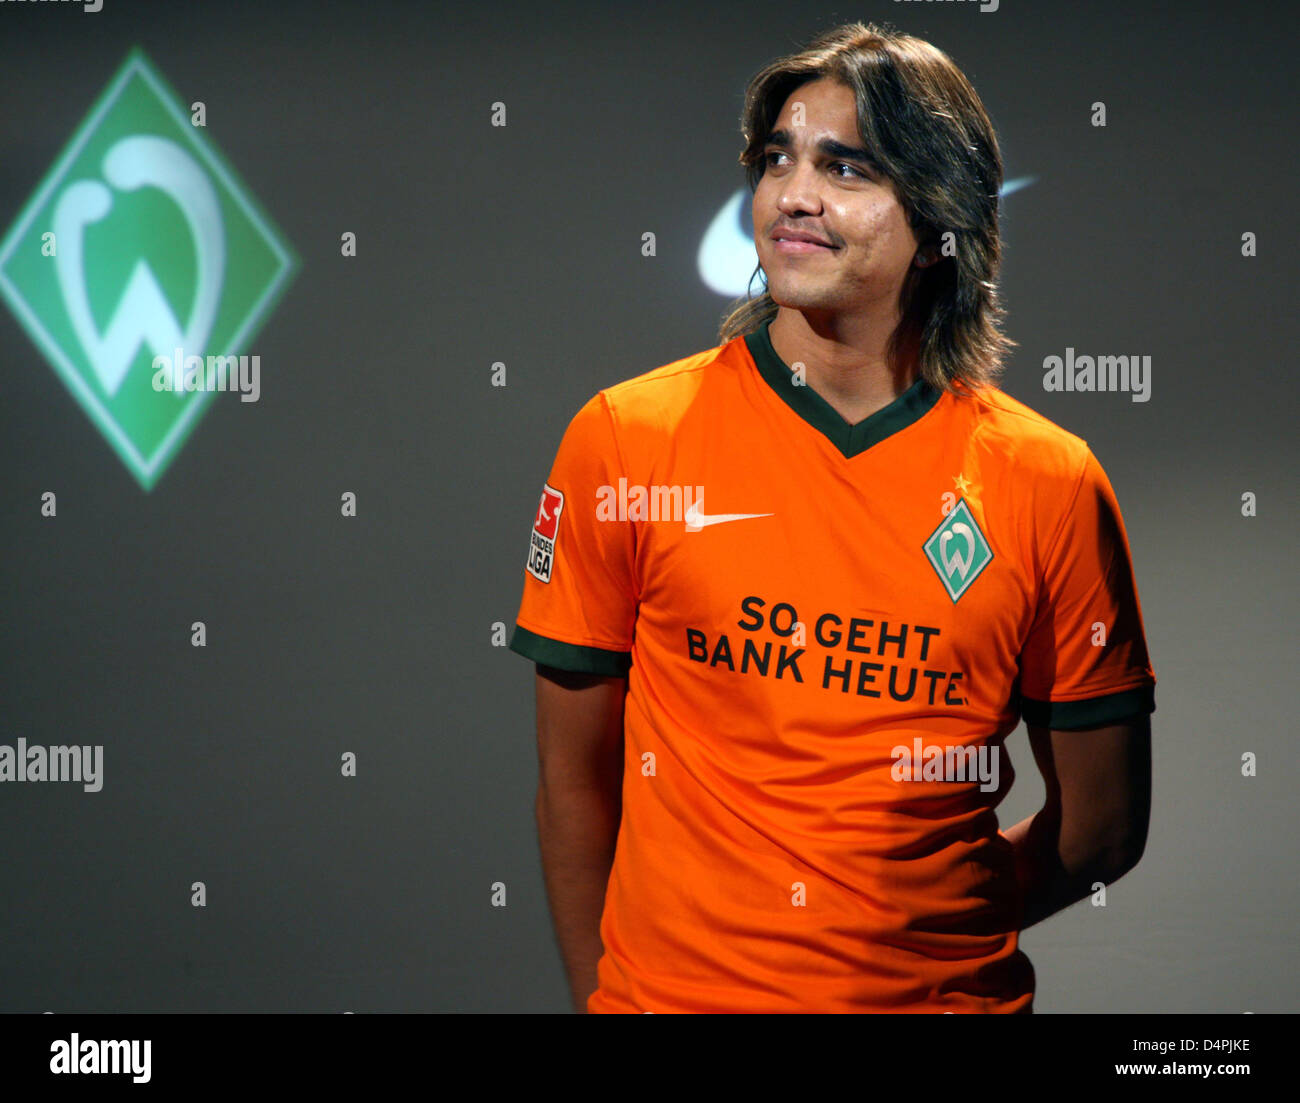 Marcelo Moreno, new player of German Bundesliga club Werder Bremen, presents the new jersey of the team for the season 2009-10 in Bremen, Germany, 02 July 2009. Photo: Lutz Bongarts Stock Photo